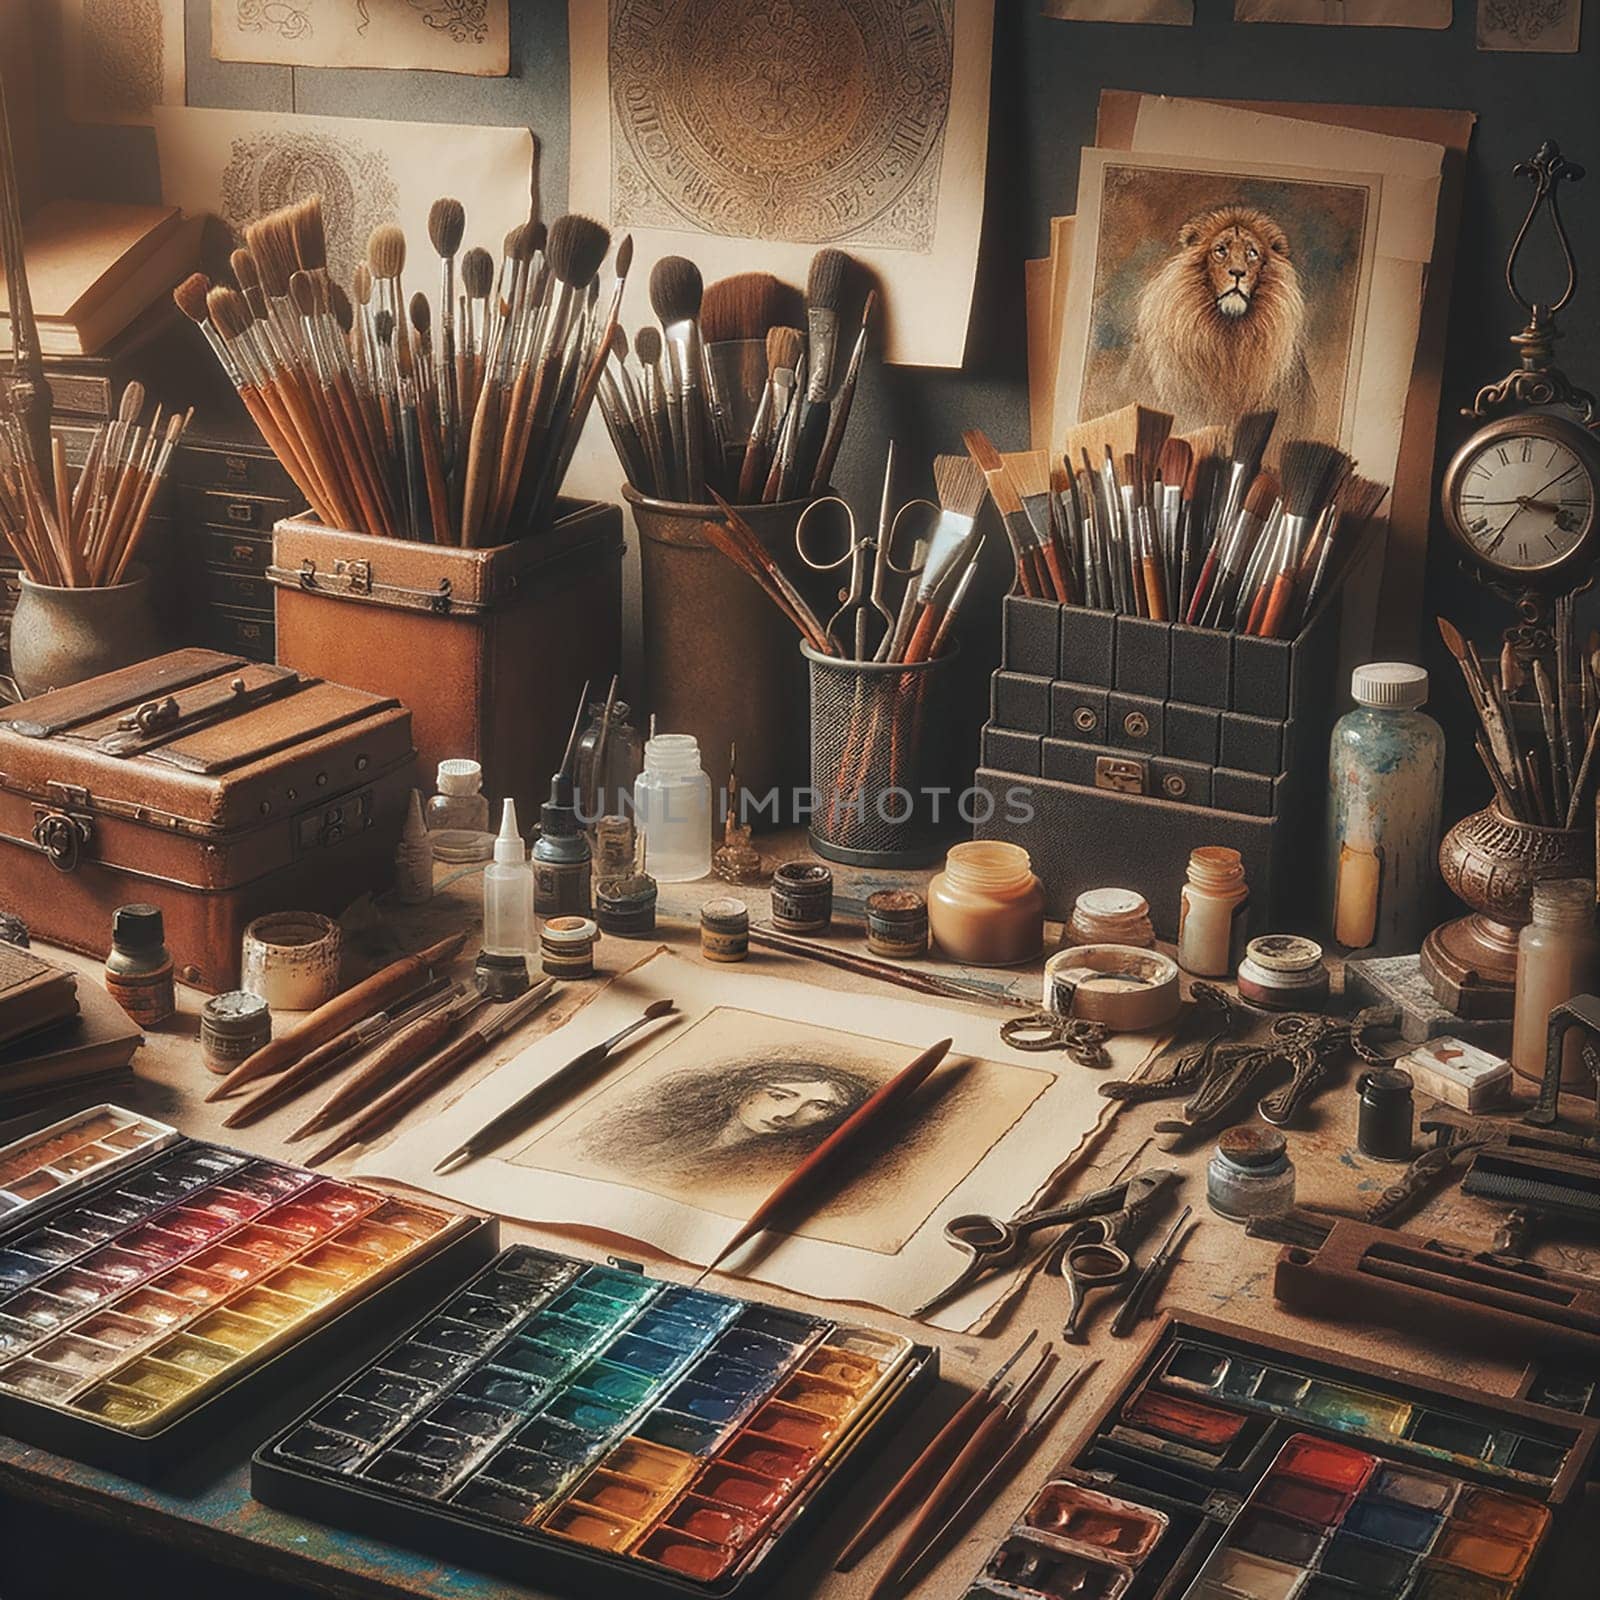 The Artistic Journey: Vintage-Inspired Toned Picture of an Artistic Setup by Petrichor